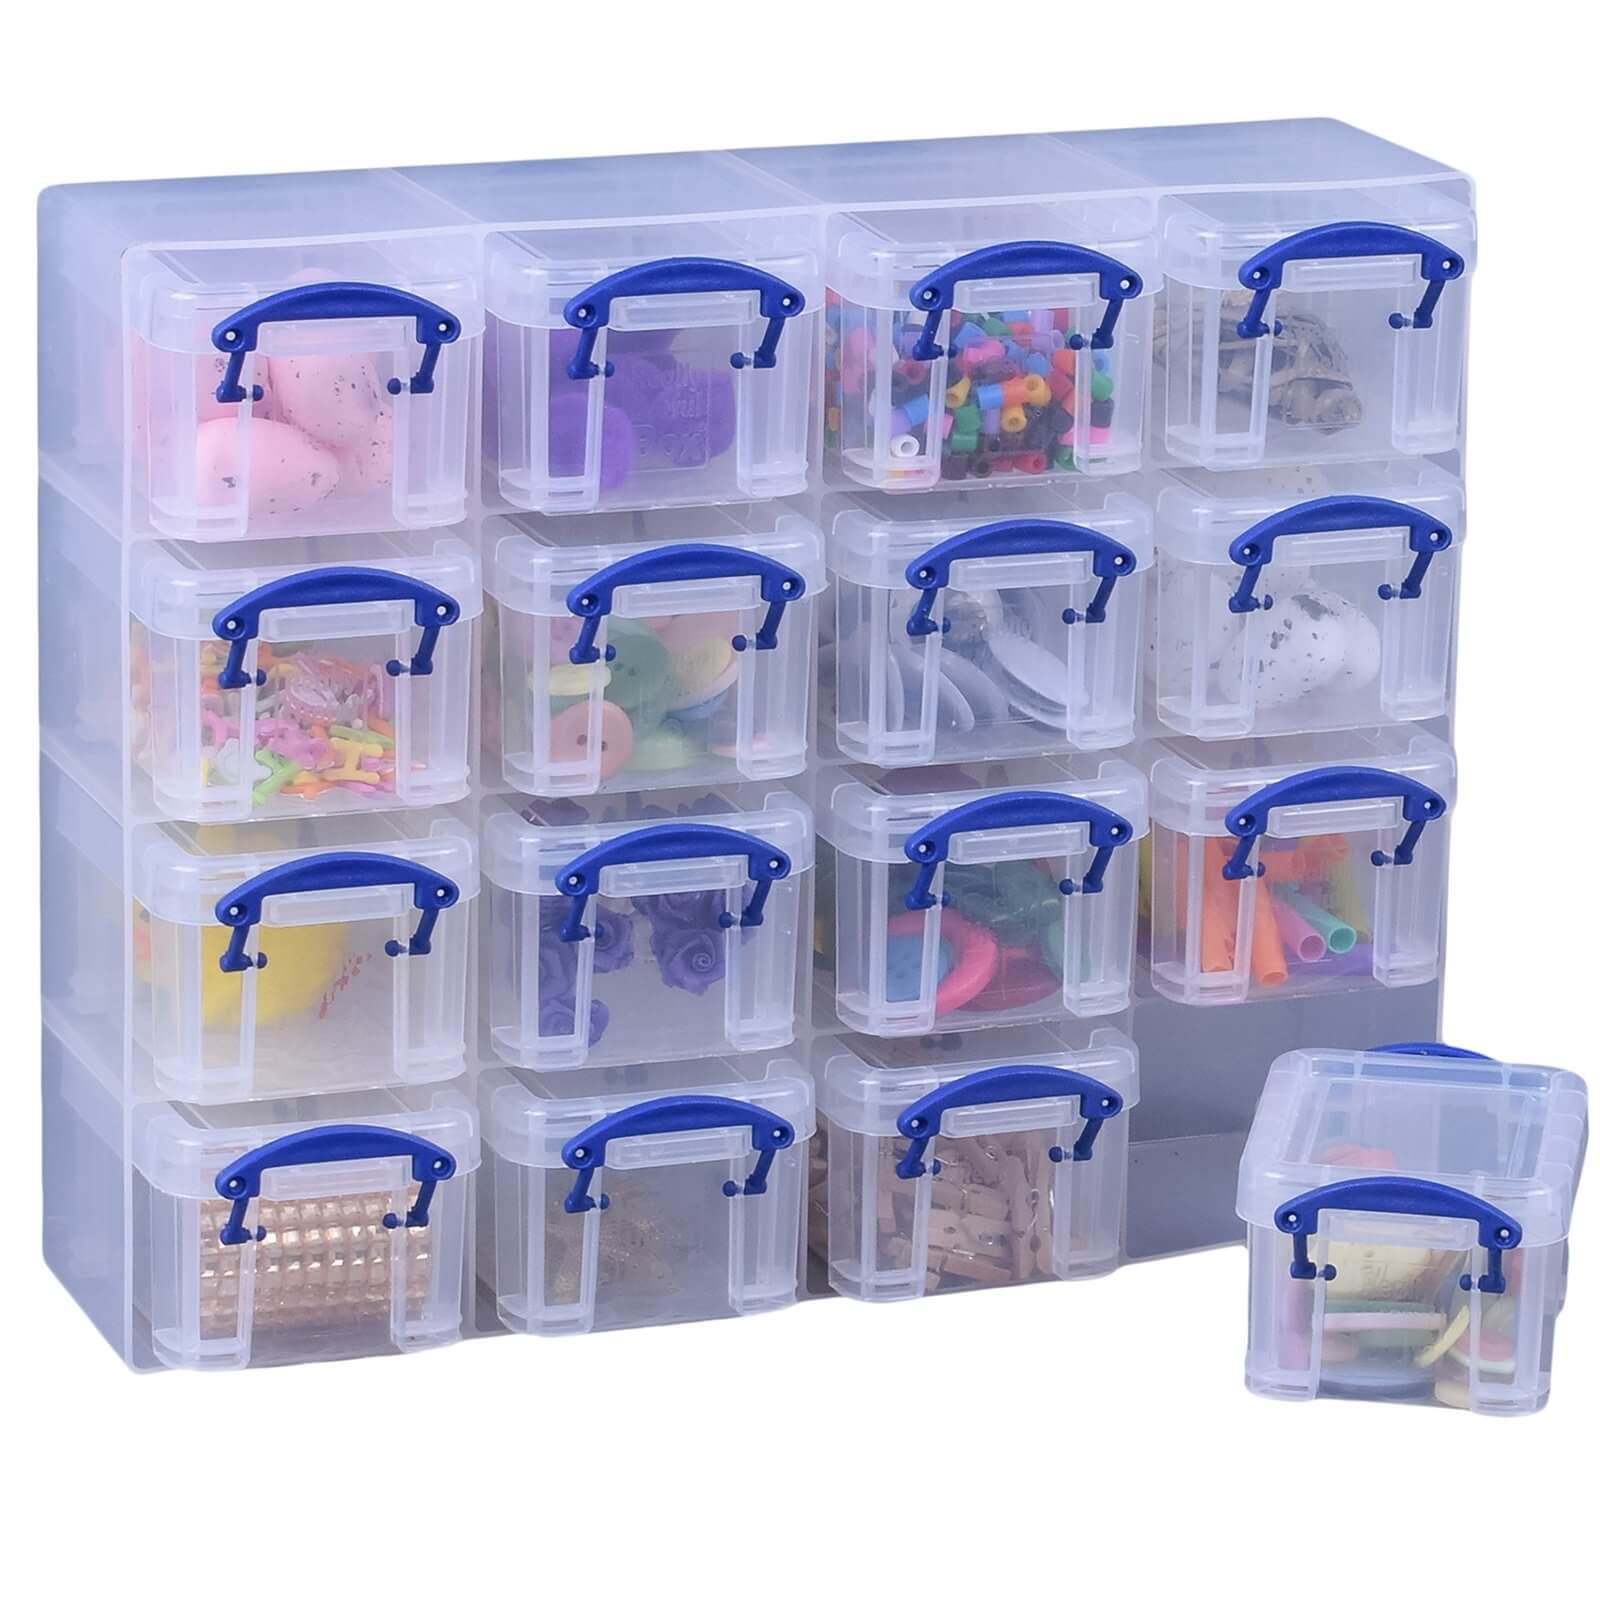 Really Useful Boxes - Clear - 0.14L - 16 Box Set